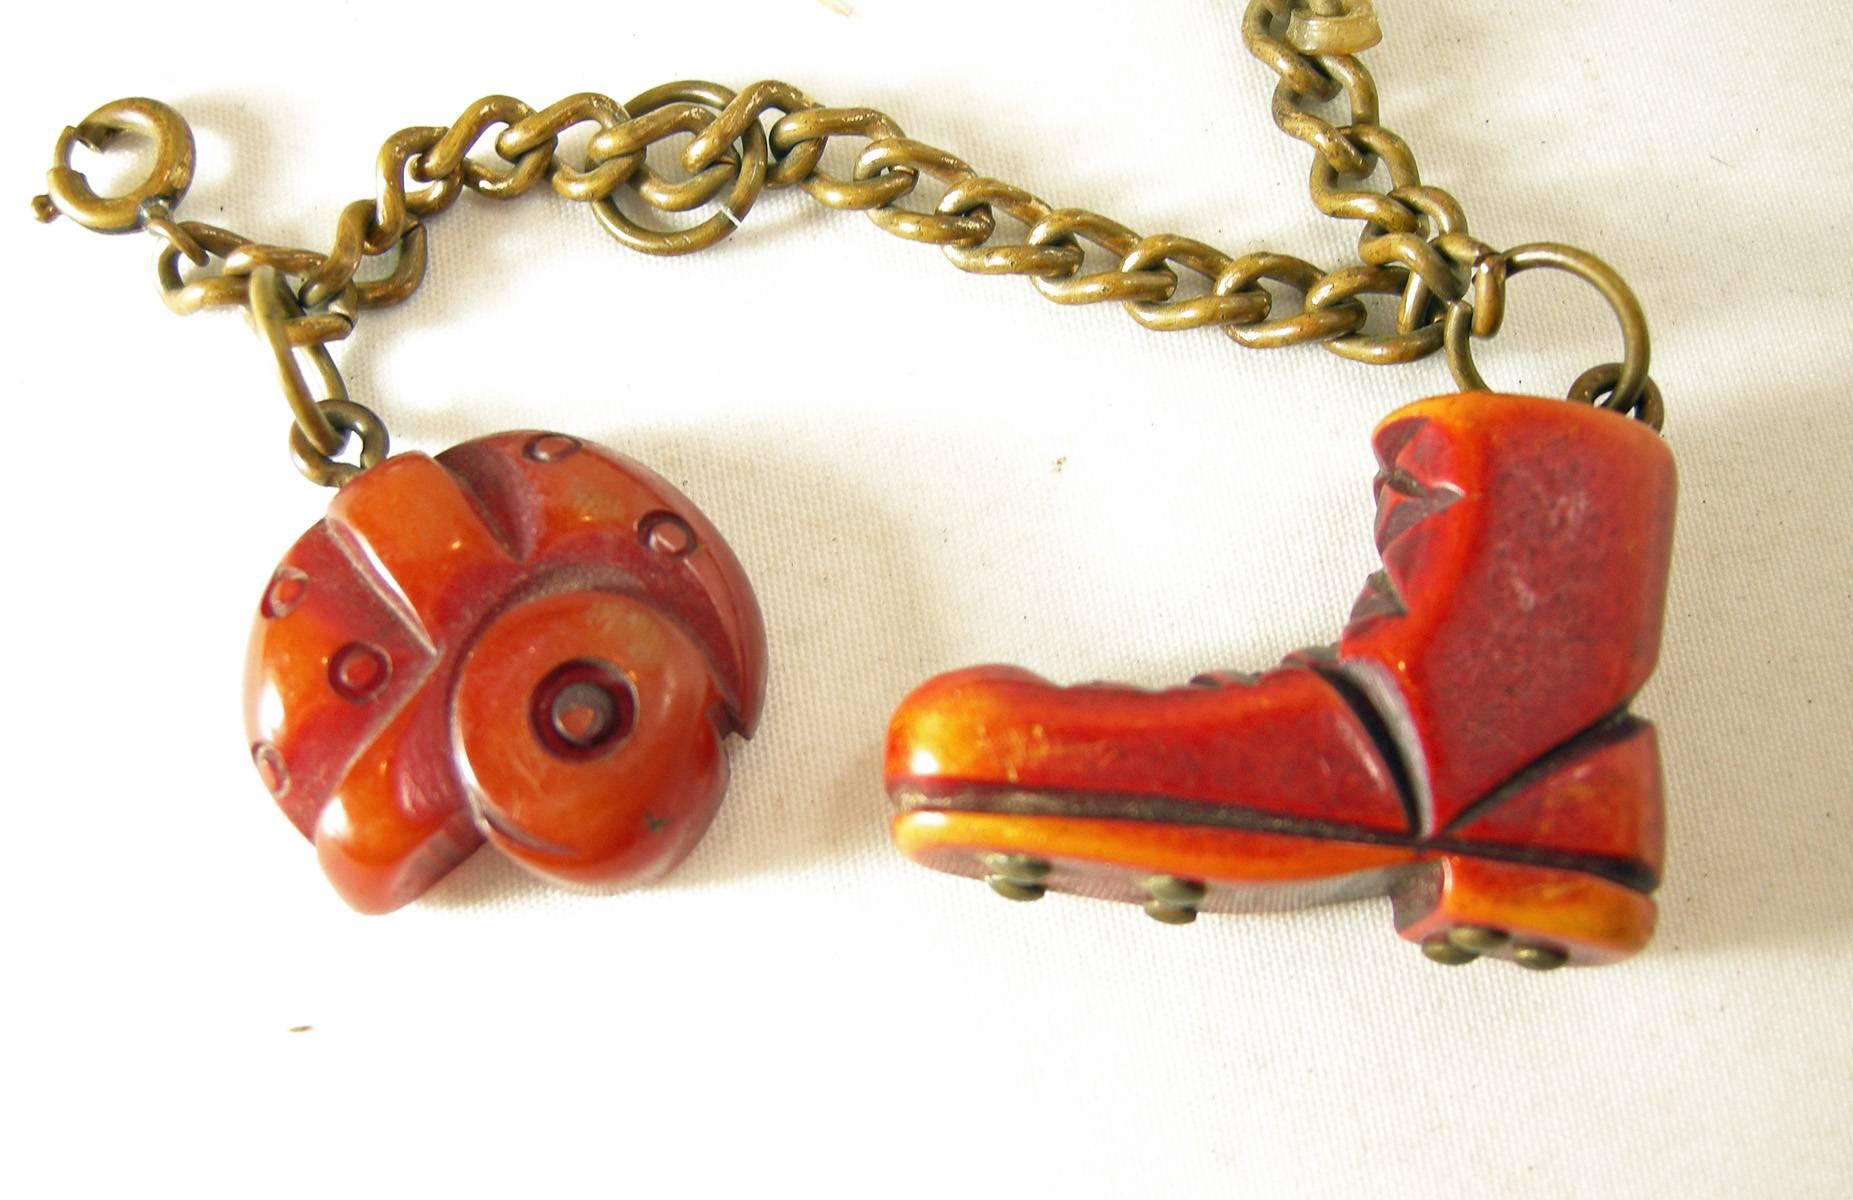 There are two rare Bakelite charms left on this bracelet.  One is red football shoe and the other is a football helmet.  The Bakelite is nicely carved and is rare to find. As we all know, these charms use to sell for $400 each and two are missing